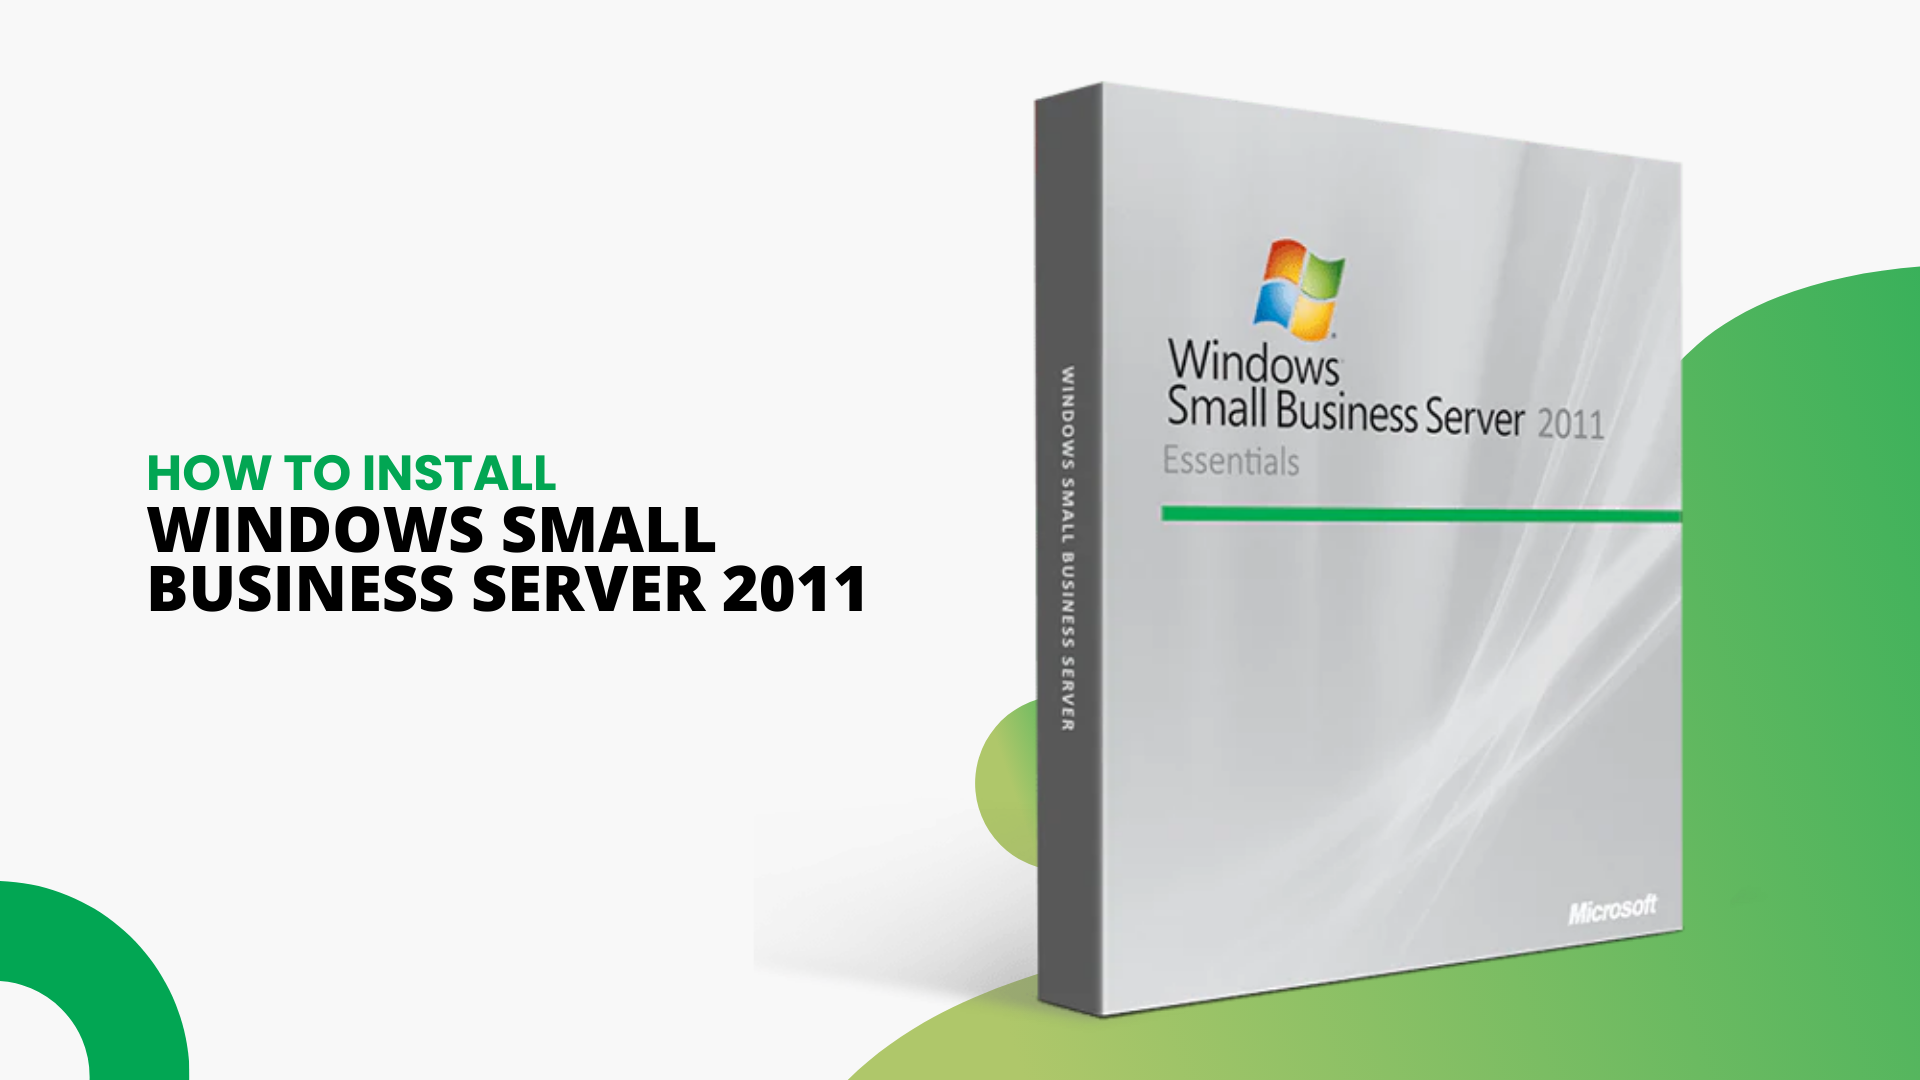 How to install Windows Small Business Server 2011